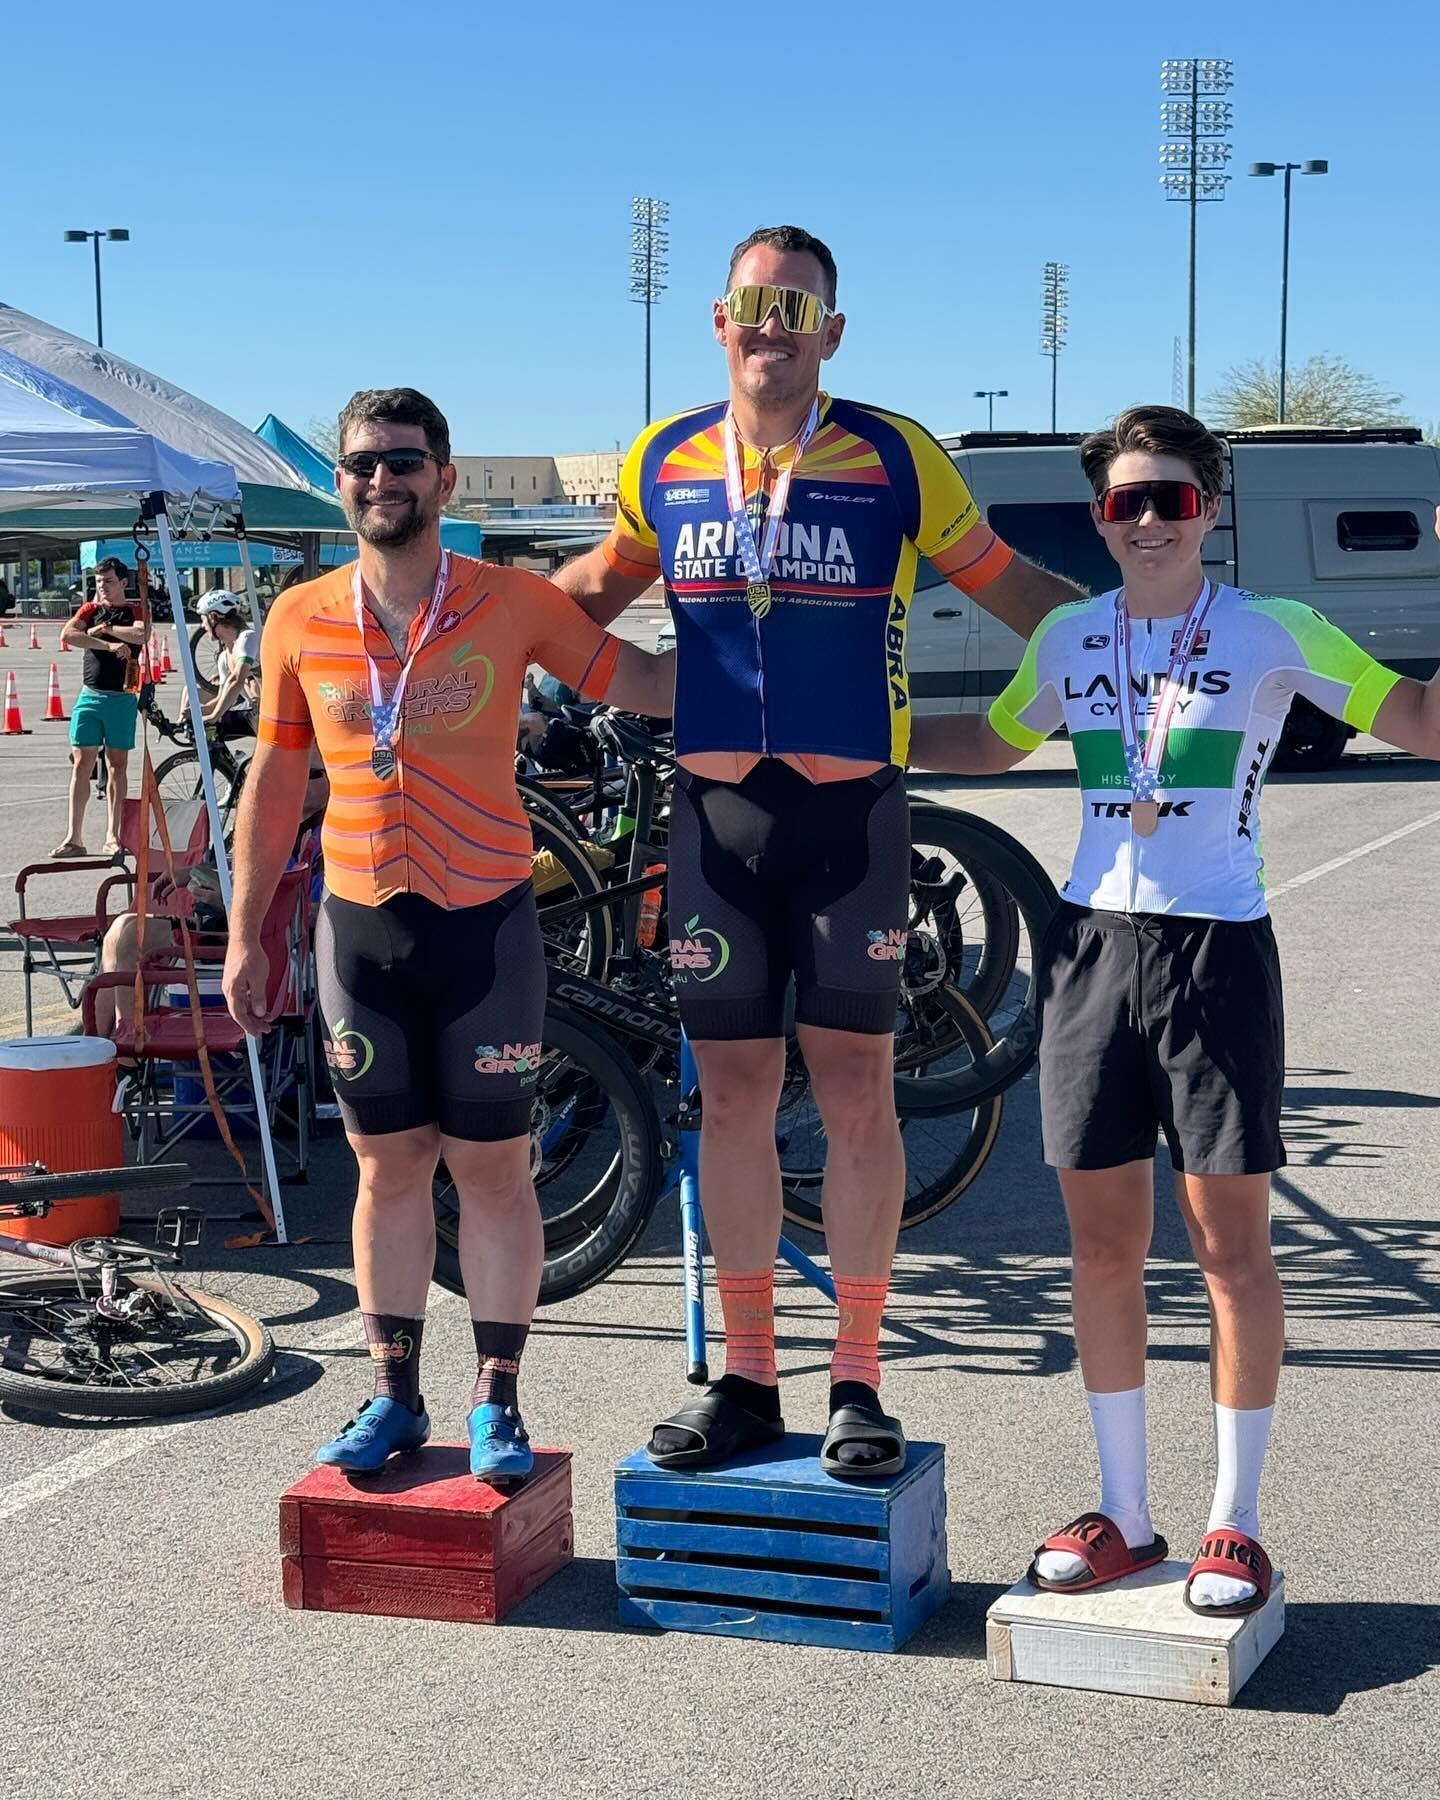 Congrats to new Arizona cat 4 crit champ Sean Bray with @koabibrooks , @chasisrunning , @offical_atkinson_noah , Justin, @caseybergeson doing some work.

Jess gets second in the state for her efforts in cat 4!

@nwagner23 fought hard for 3rd in cat 5